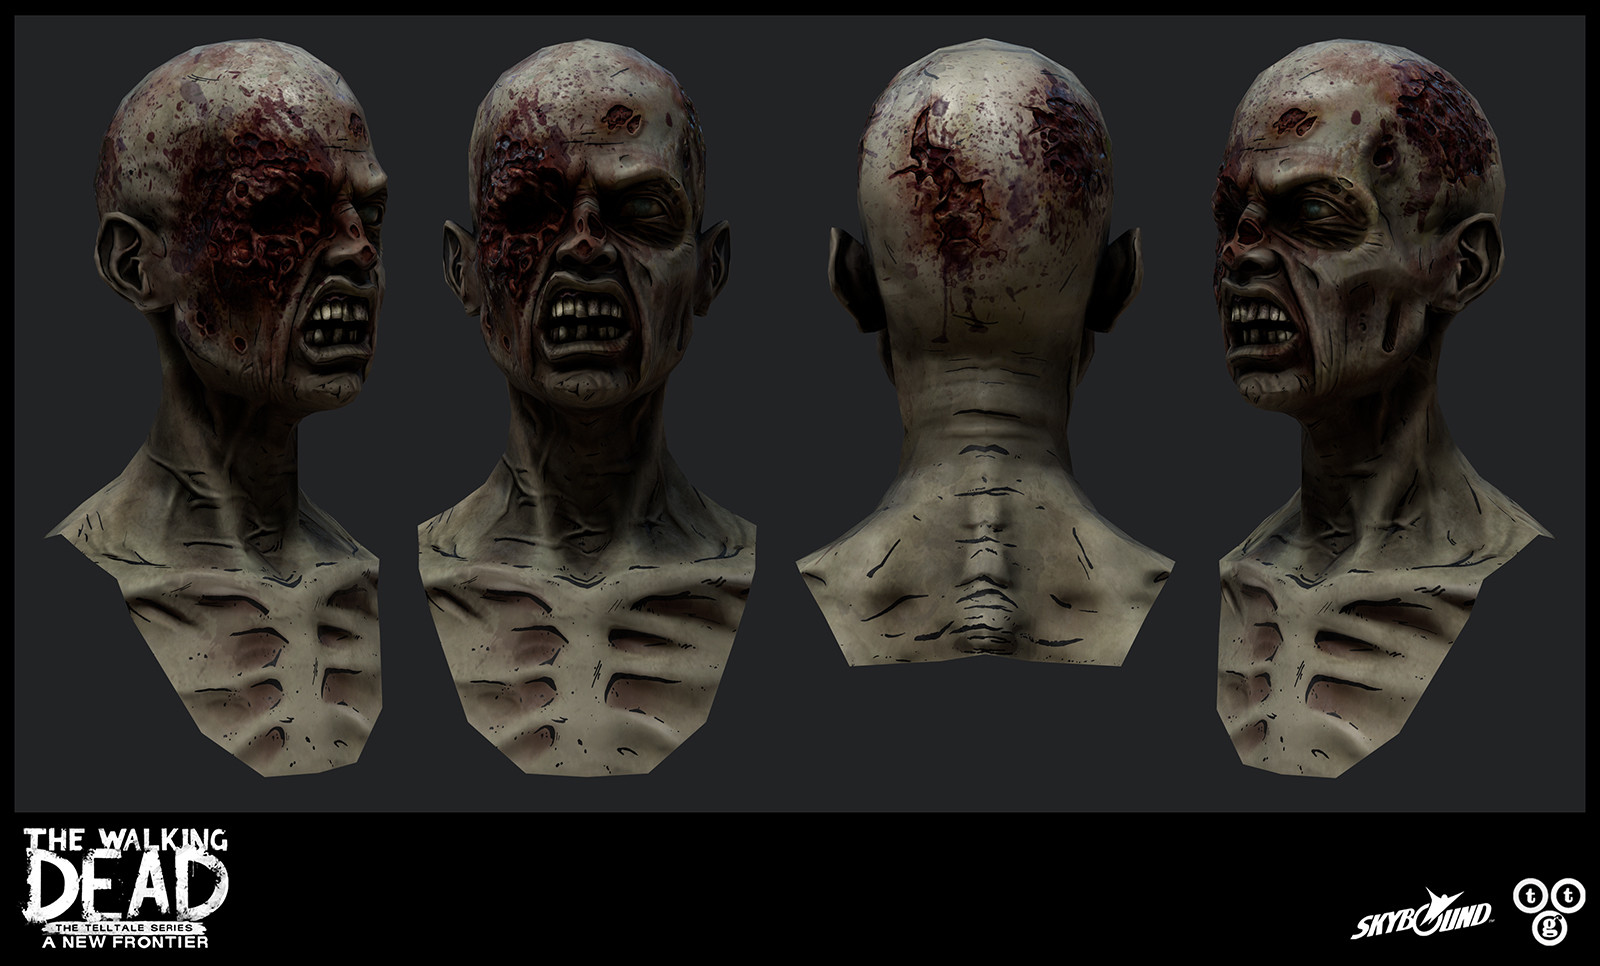 Some quick renders of this zombie head.